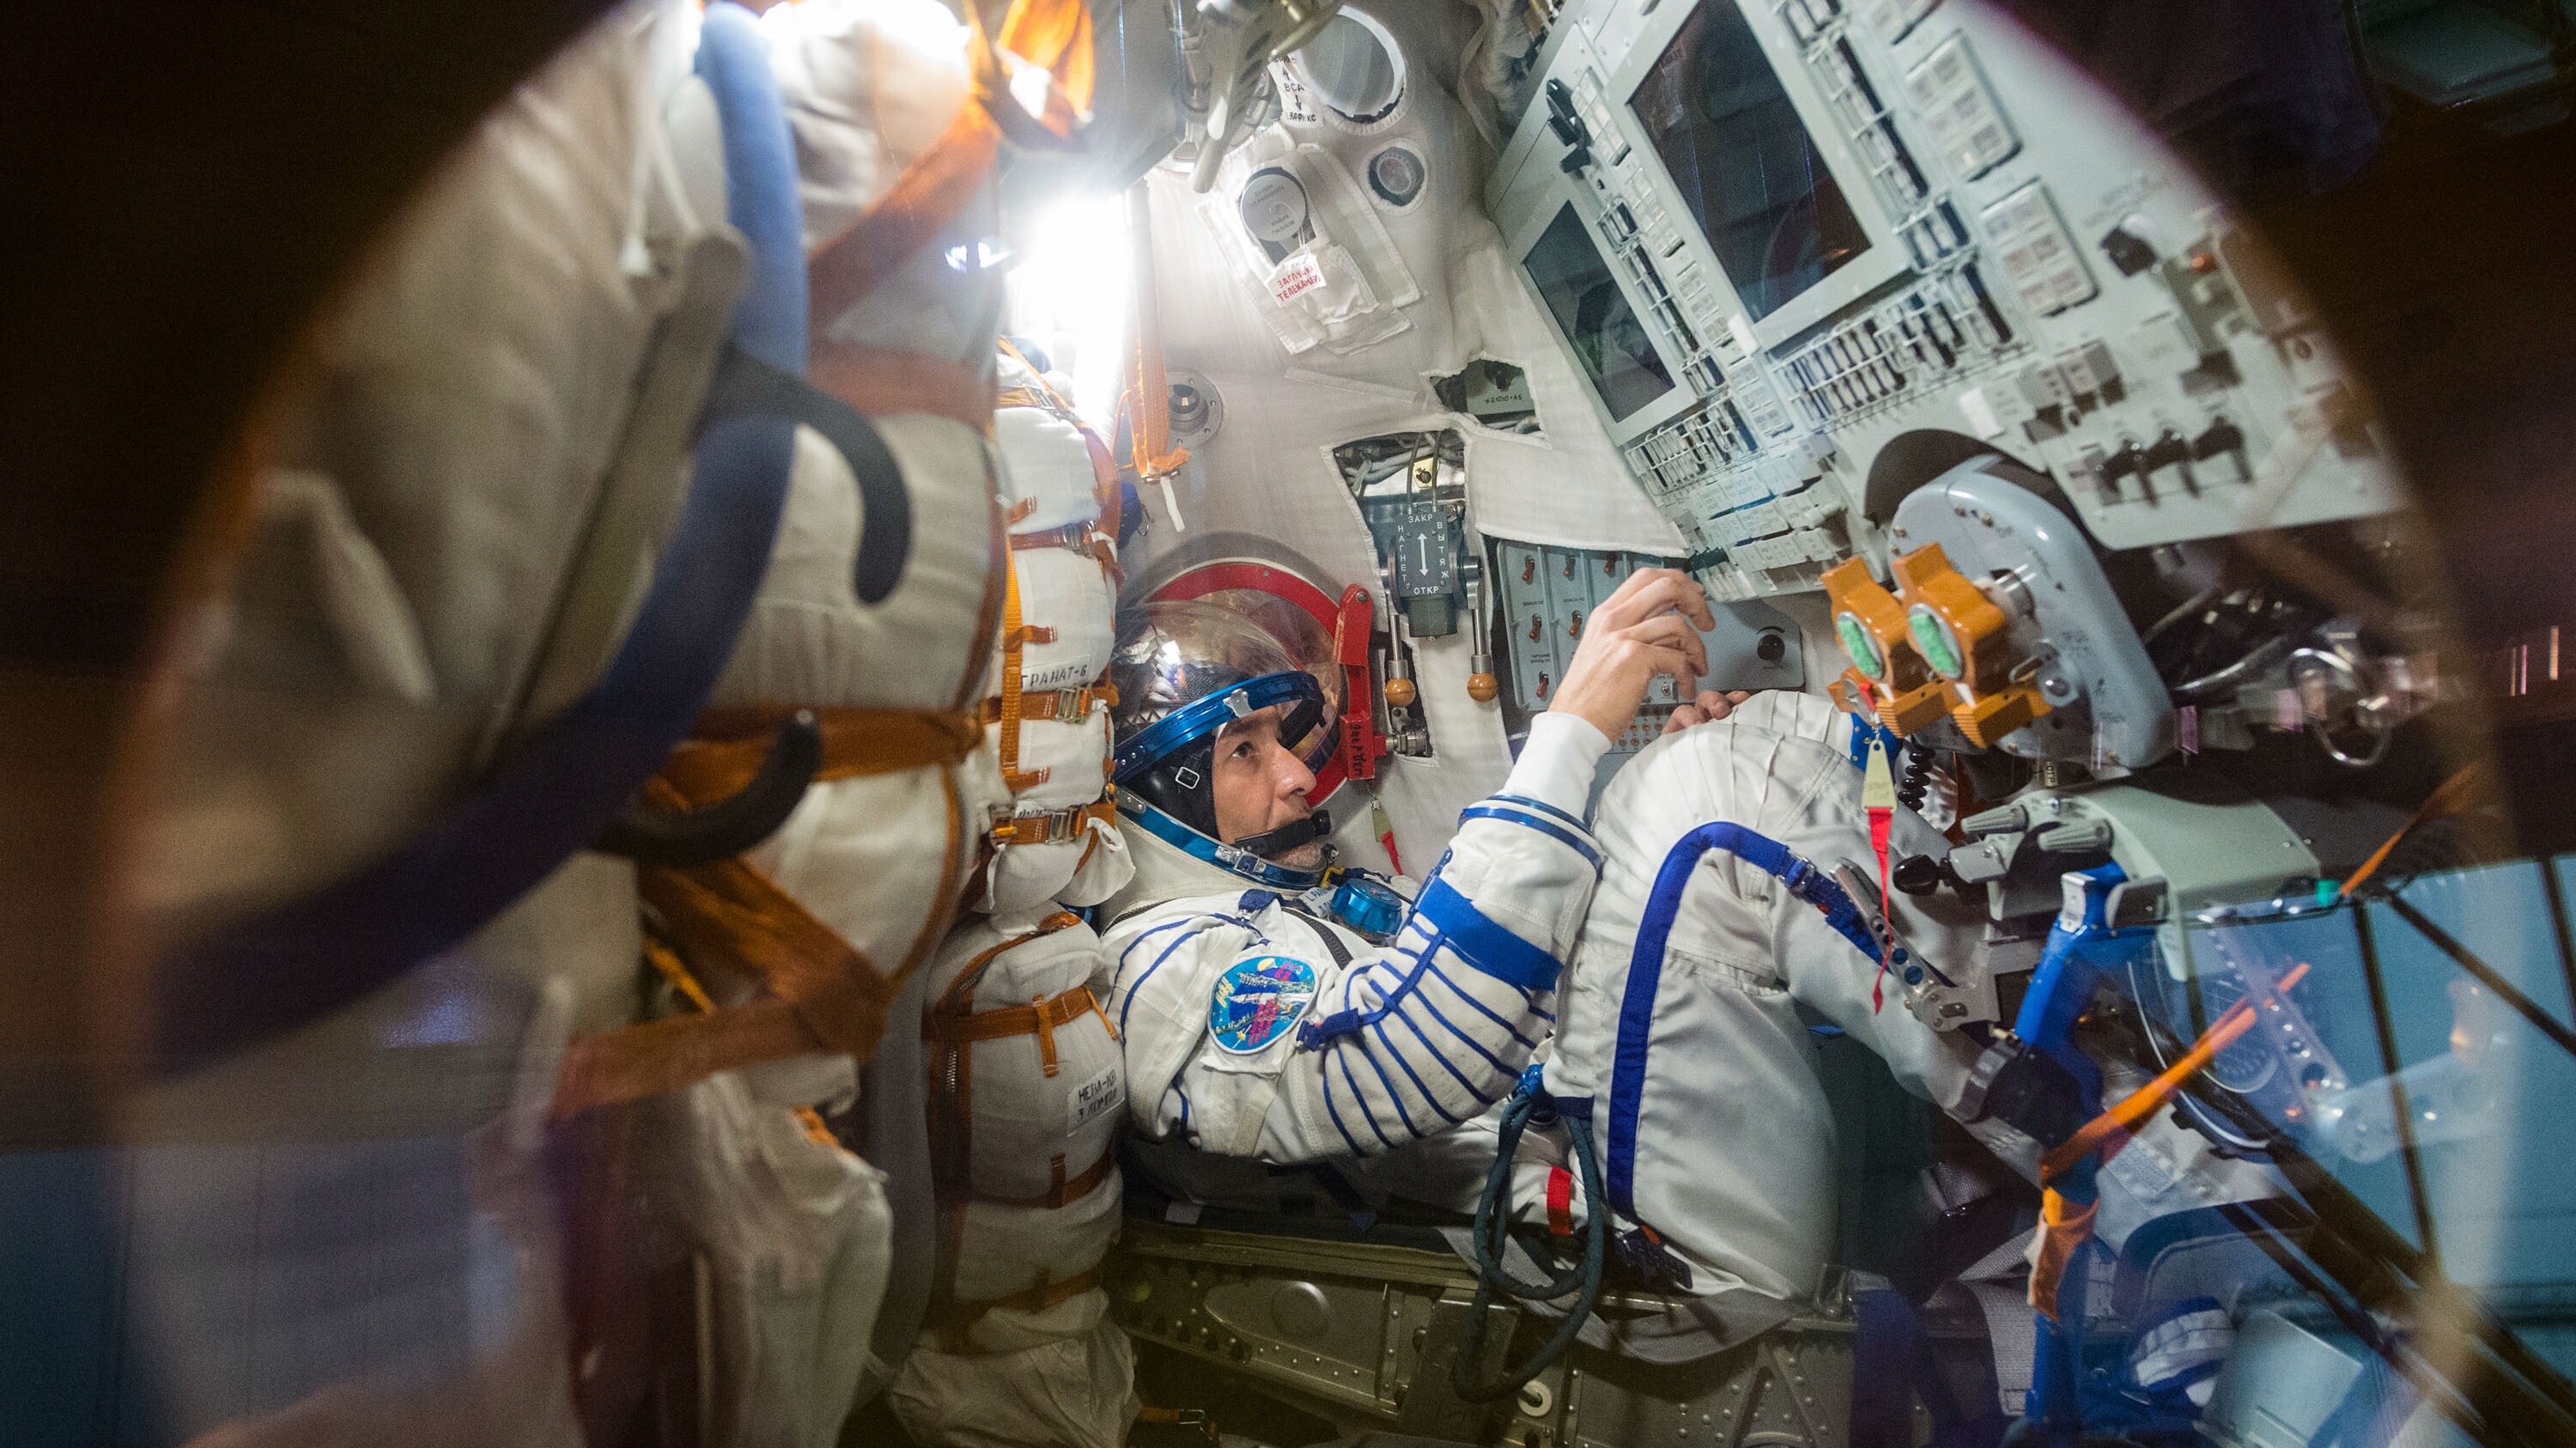 AMONG THE STARS -  (July 5, 2019) - At the Baikonur Cosmodrome in Kazakhstan, Expedition 60 crewmember Luca Parmitano of the European Space Agency works procedures inside his Soyuz spacecraft July 5 as part of pre-launch activities.Parmitano, Drew Morgan of NASA and Alexander Skvortsov of Roscosmos will launch July 20 on the Soyuz MS-13 spacecraft from the Baikonur Cosmodrome for a mission on the International Space Station. (Andrey Shelepin/GCTC) LUCA PARMITANO